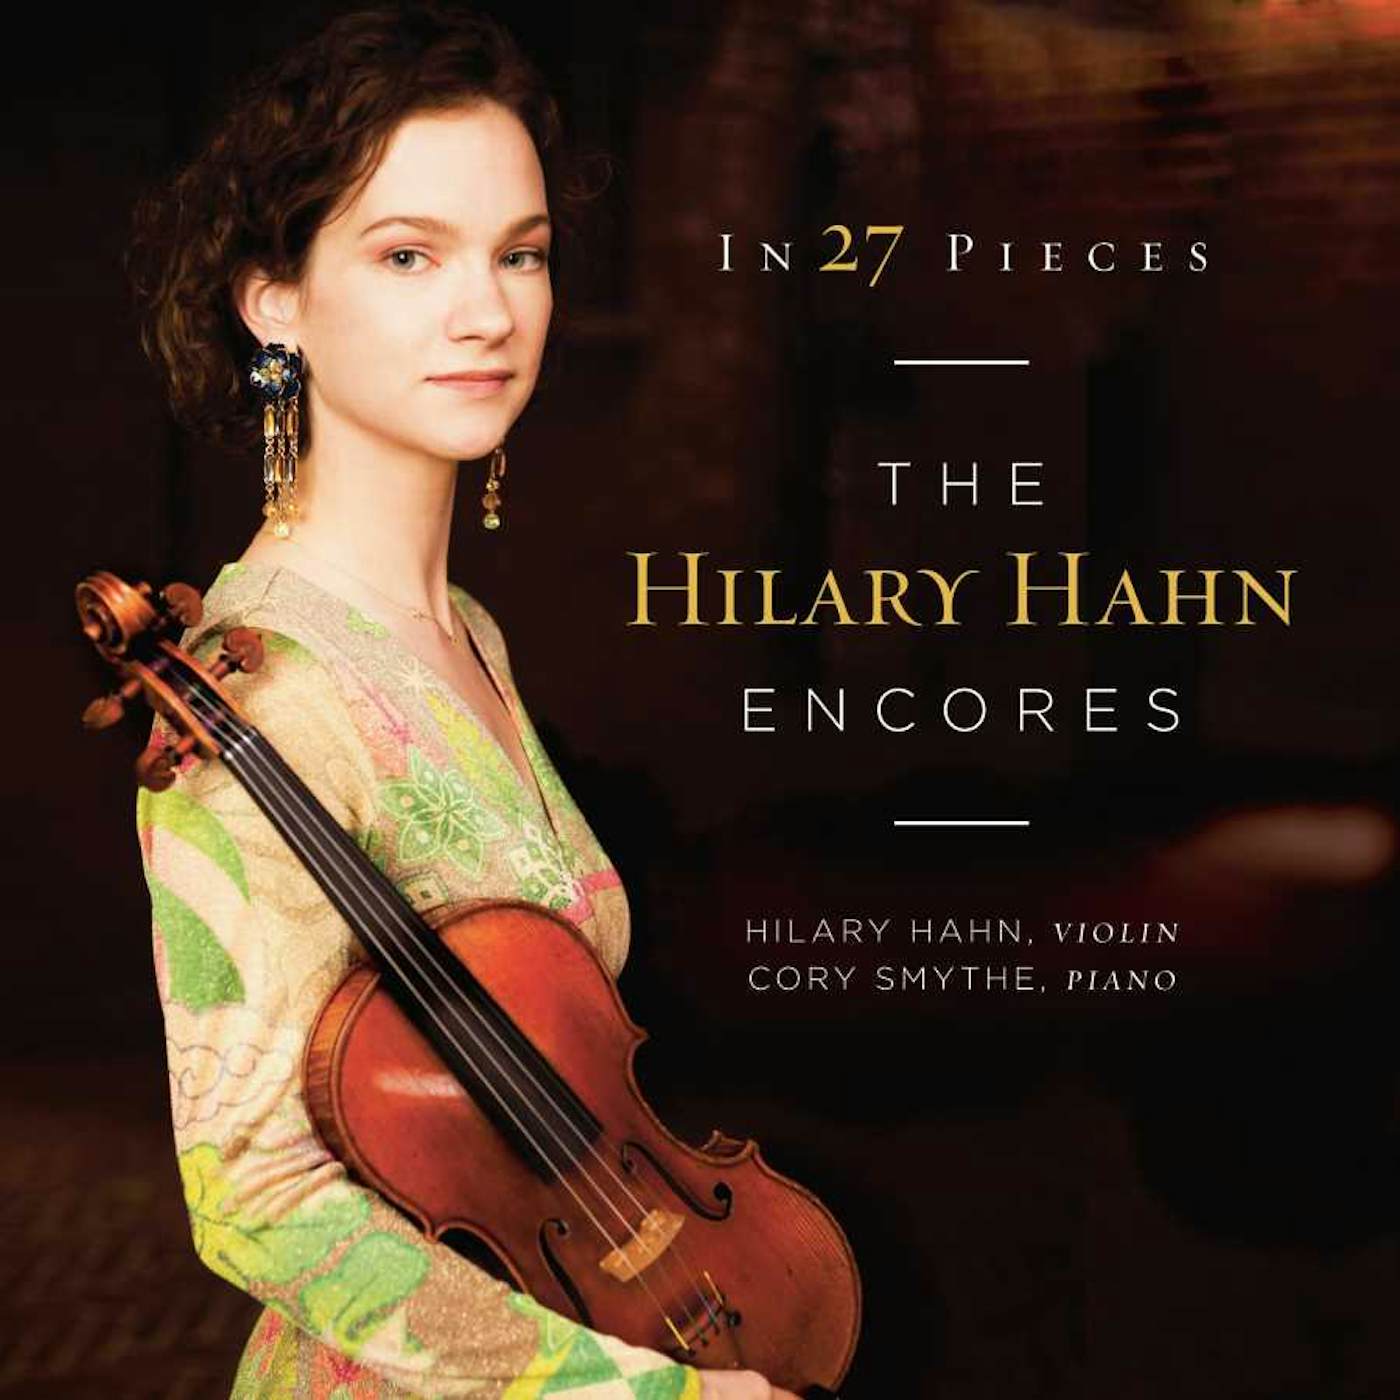 In 27 Pieces: The Hilary Hahn Encores Vinyl Record